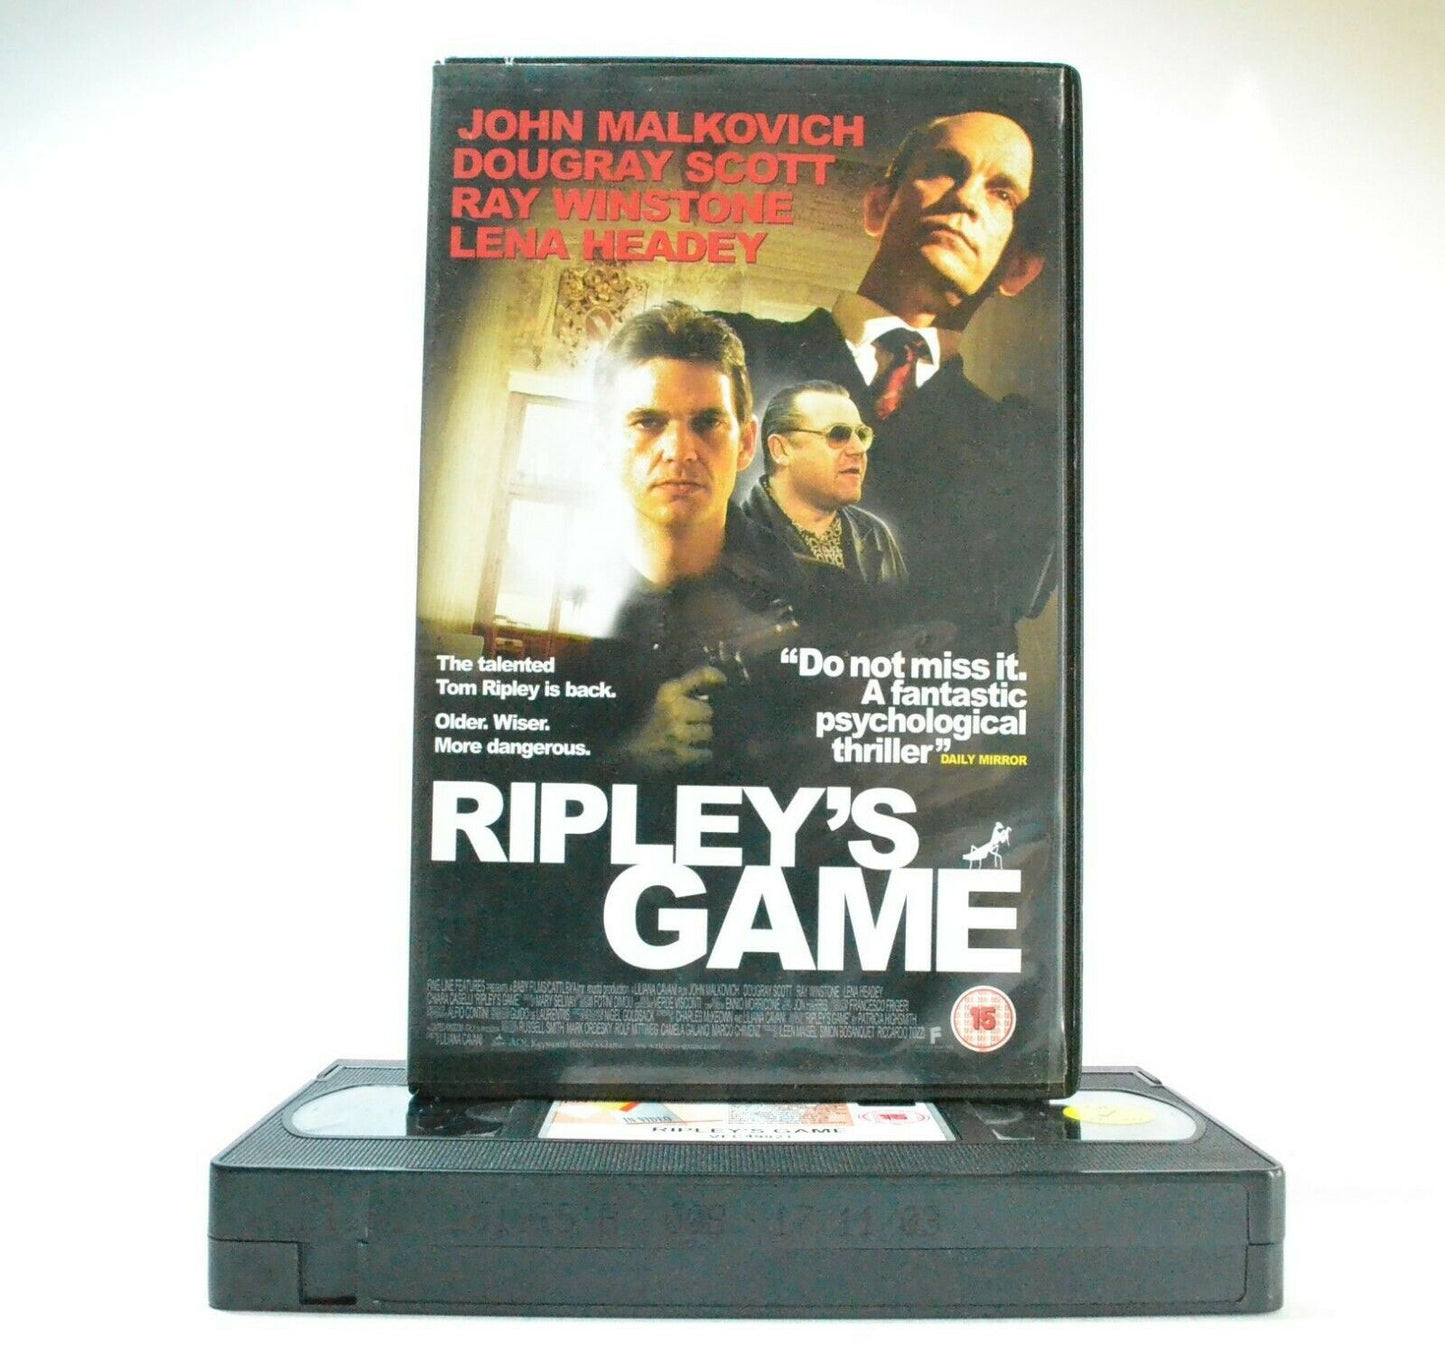 Ripley's Game: Psychological Thriller - Large Box - J.Malkovich/R.Winstone - VHS-